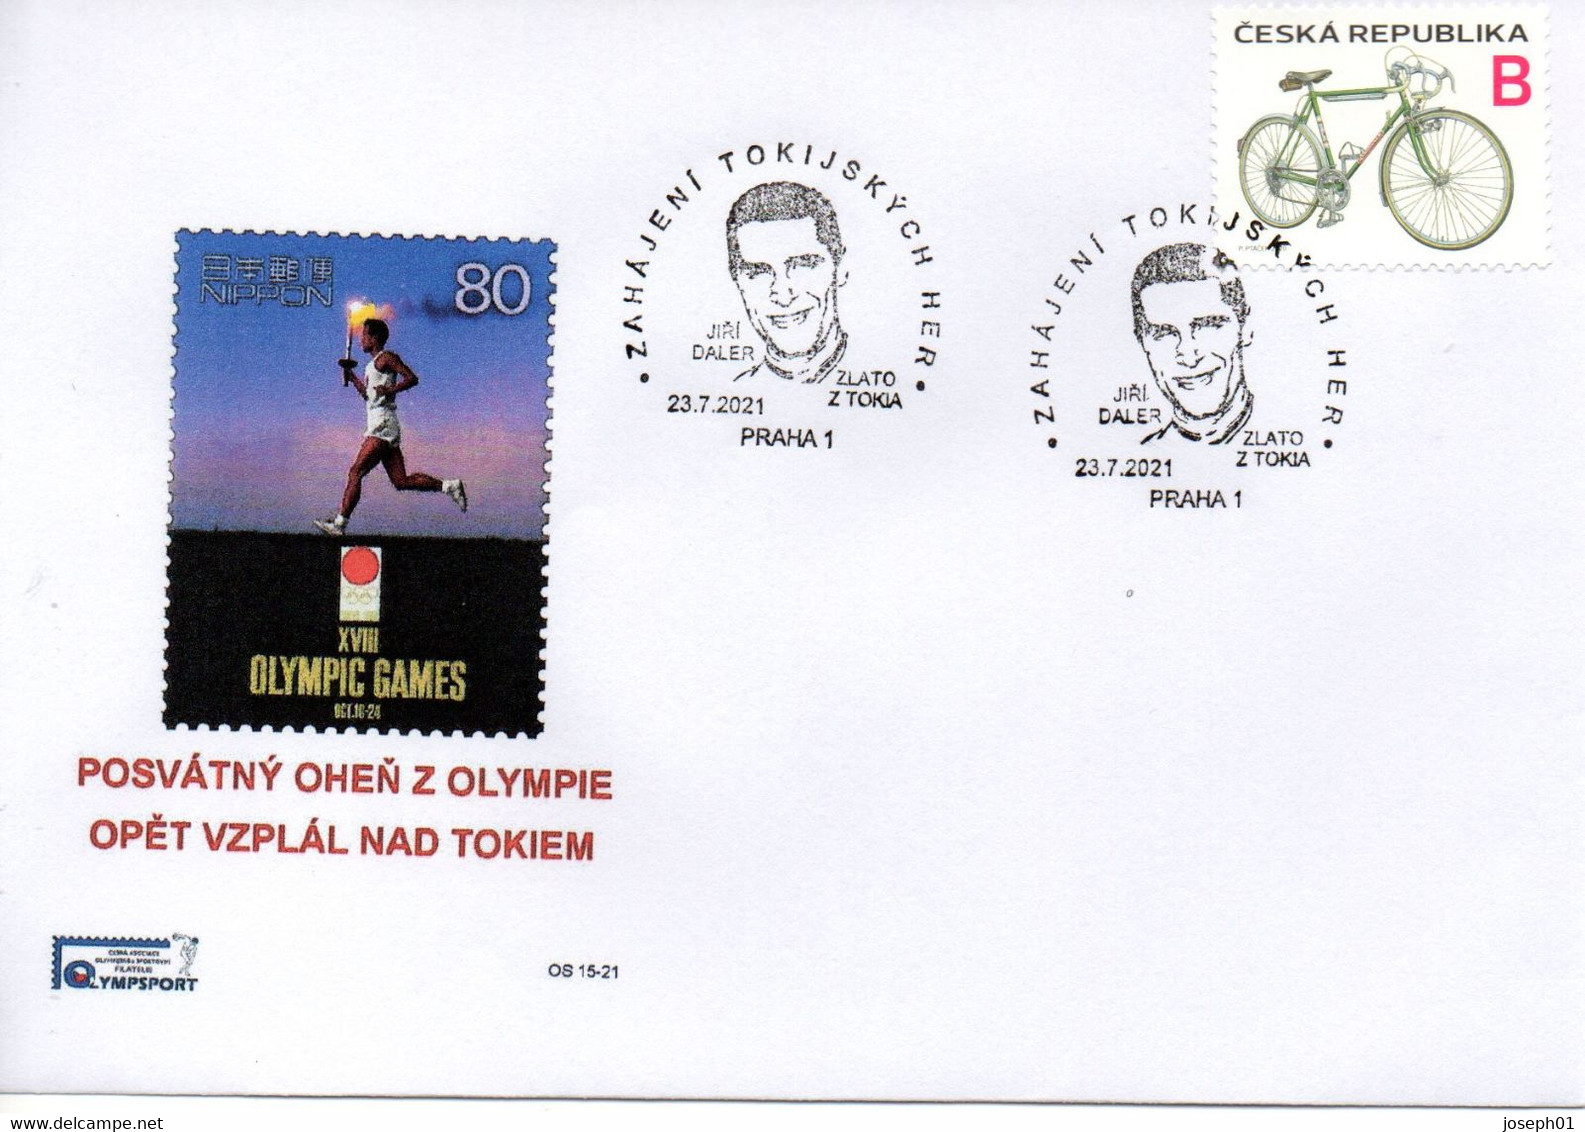 Czech Republic (21-15)  Olympic Games 2020 Opening Day Daler Gold Medal Tokyo 1964 - Cover - Sommer 2020: Tokio